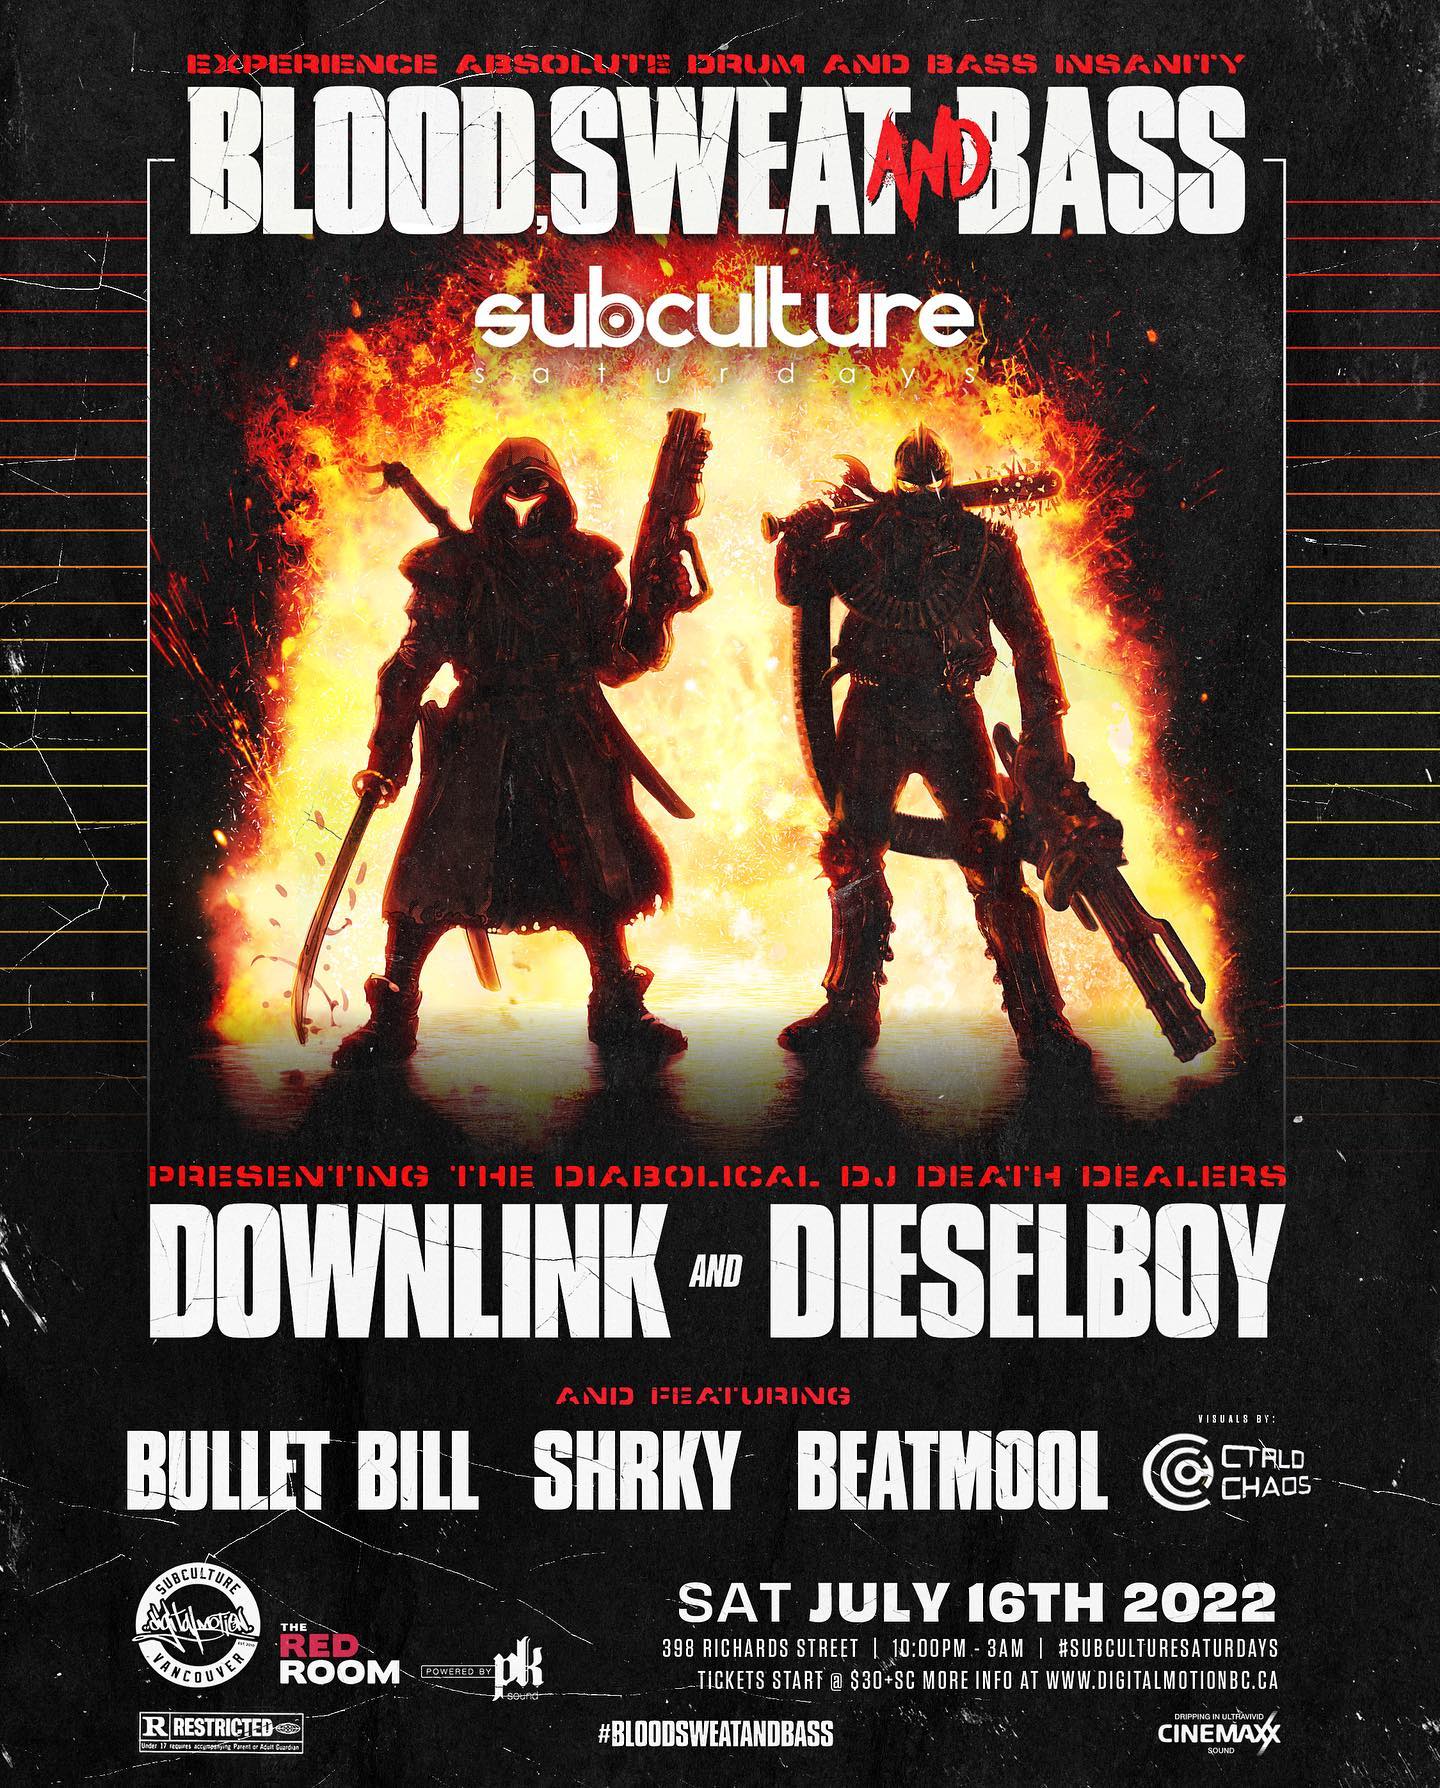 The Blood, Sweat, & Bass Tour goes down July 16th with DnB heavy hitters Downlink and Dieselboy! This has become a must see, mind blowing event for the bass community. Get ready to experience absolute 100% Drum & Bass insanity! All flavours will represented. Tickets are now on sale on @digitalmotionevents website 🔊💯🎶🎉